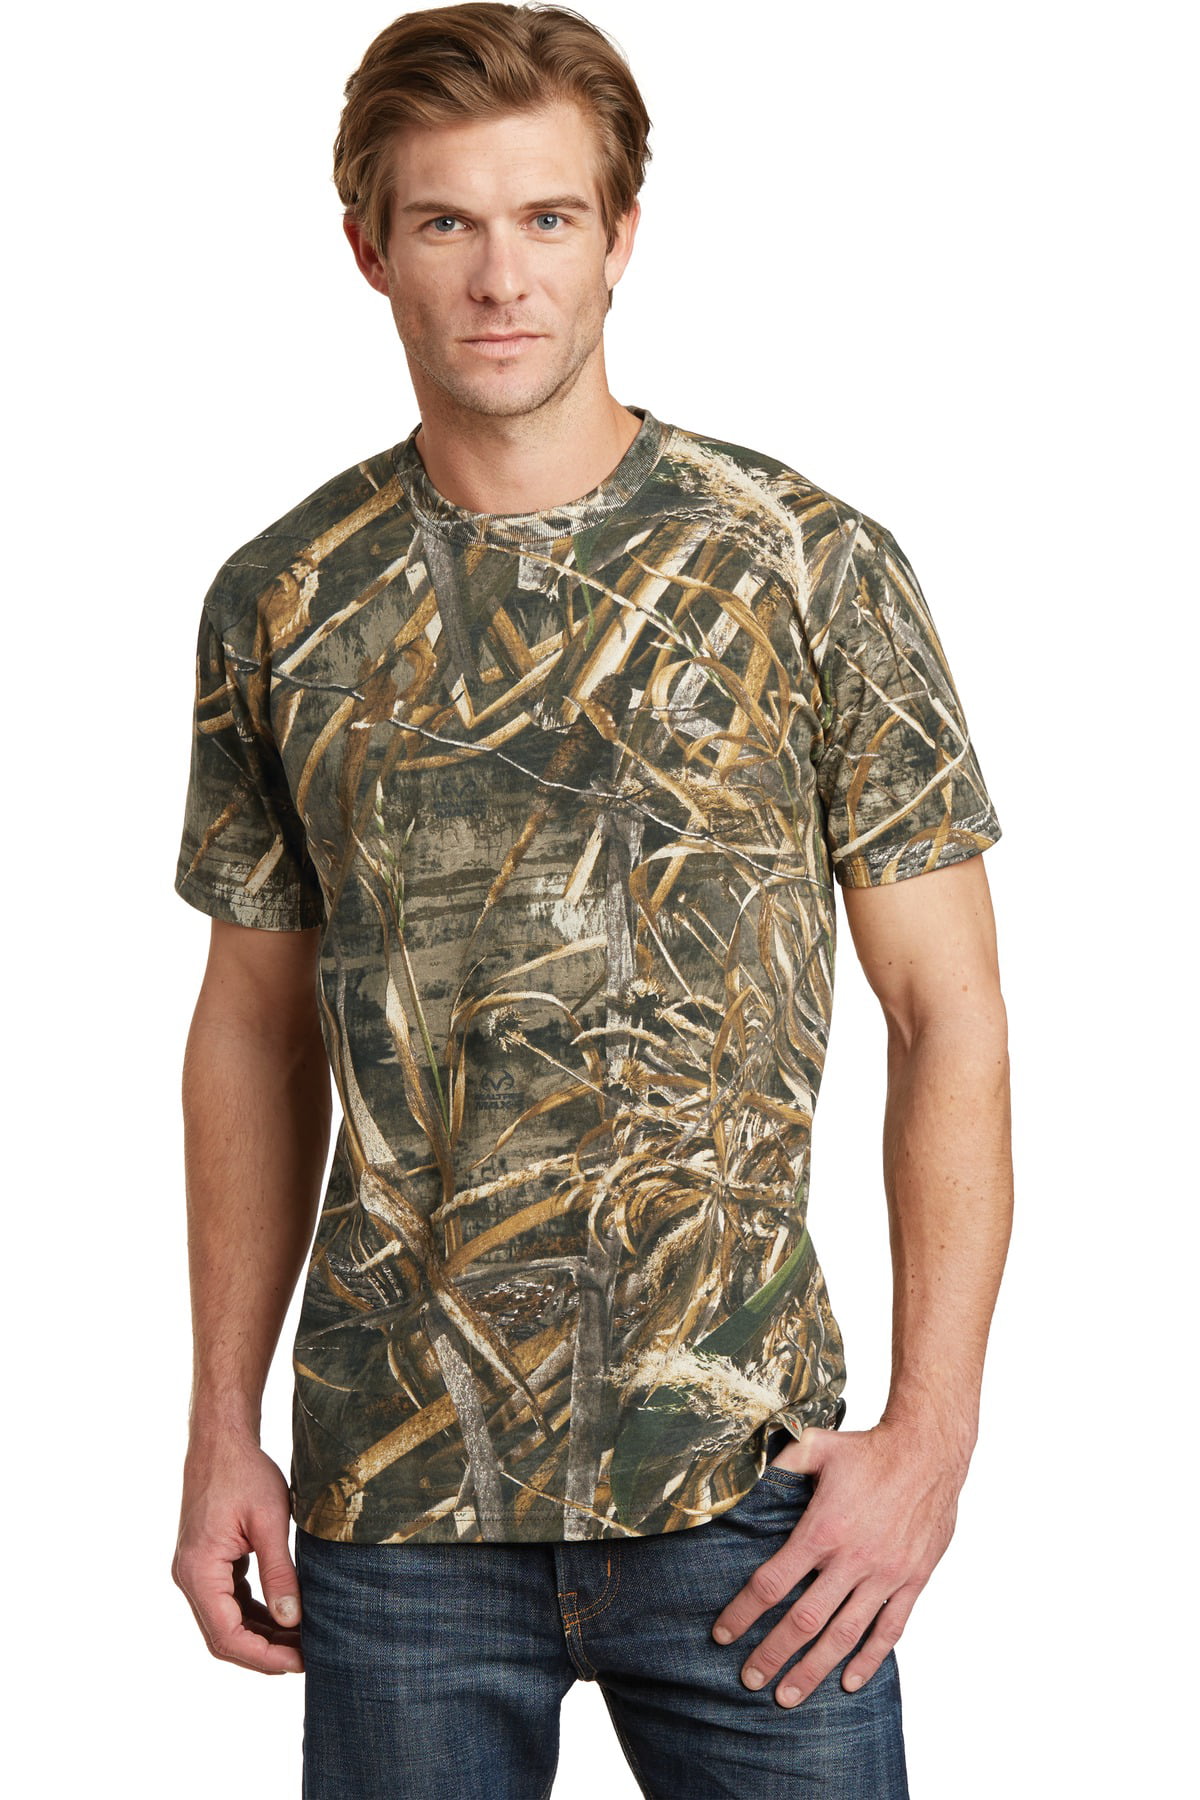 NWT Boys Real Tree Extra Camouflage T Shirt Camo hunting colors style top 